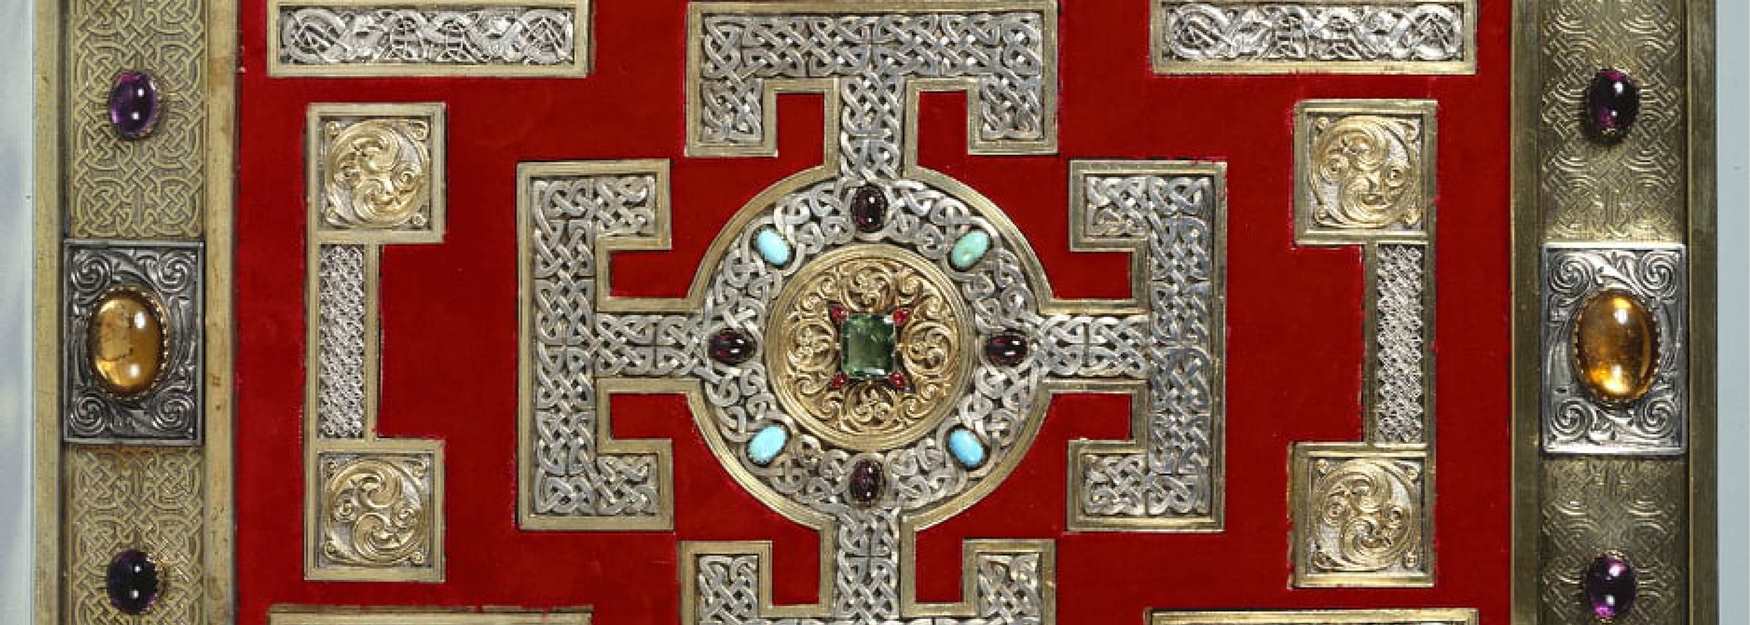 Lindisfarne Gospels close up of the front cover of the book